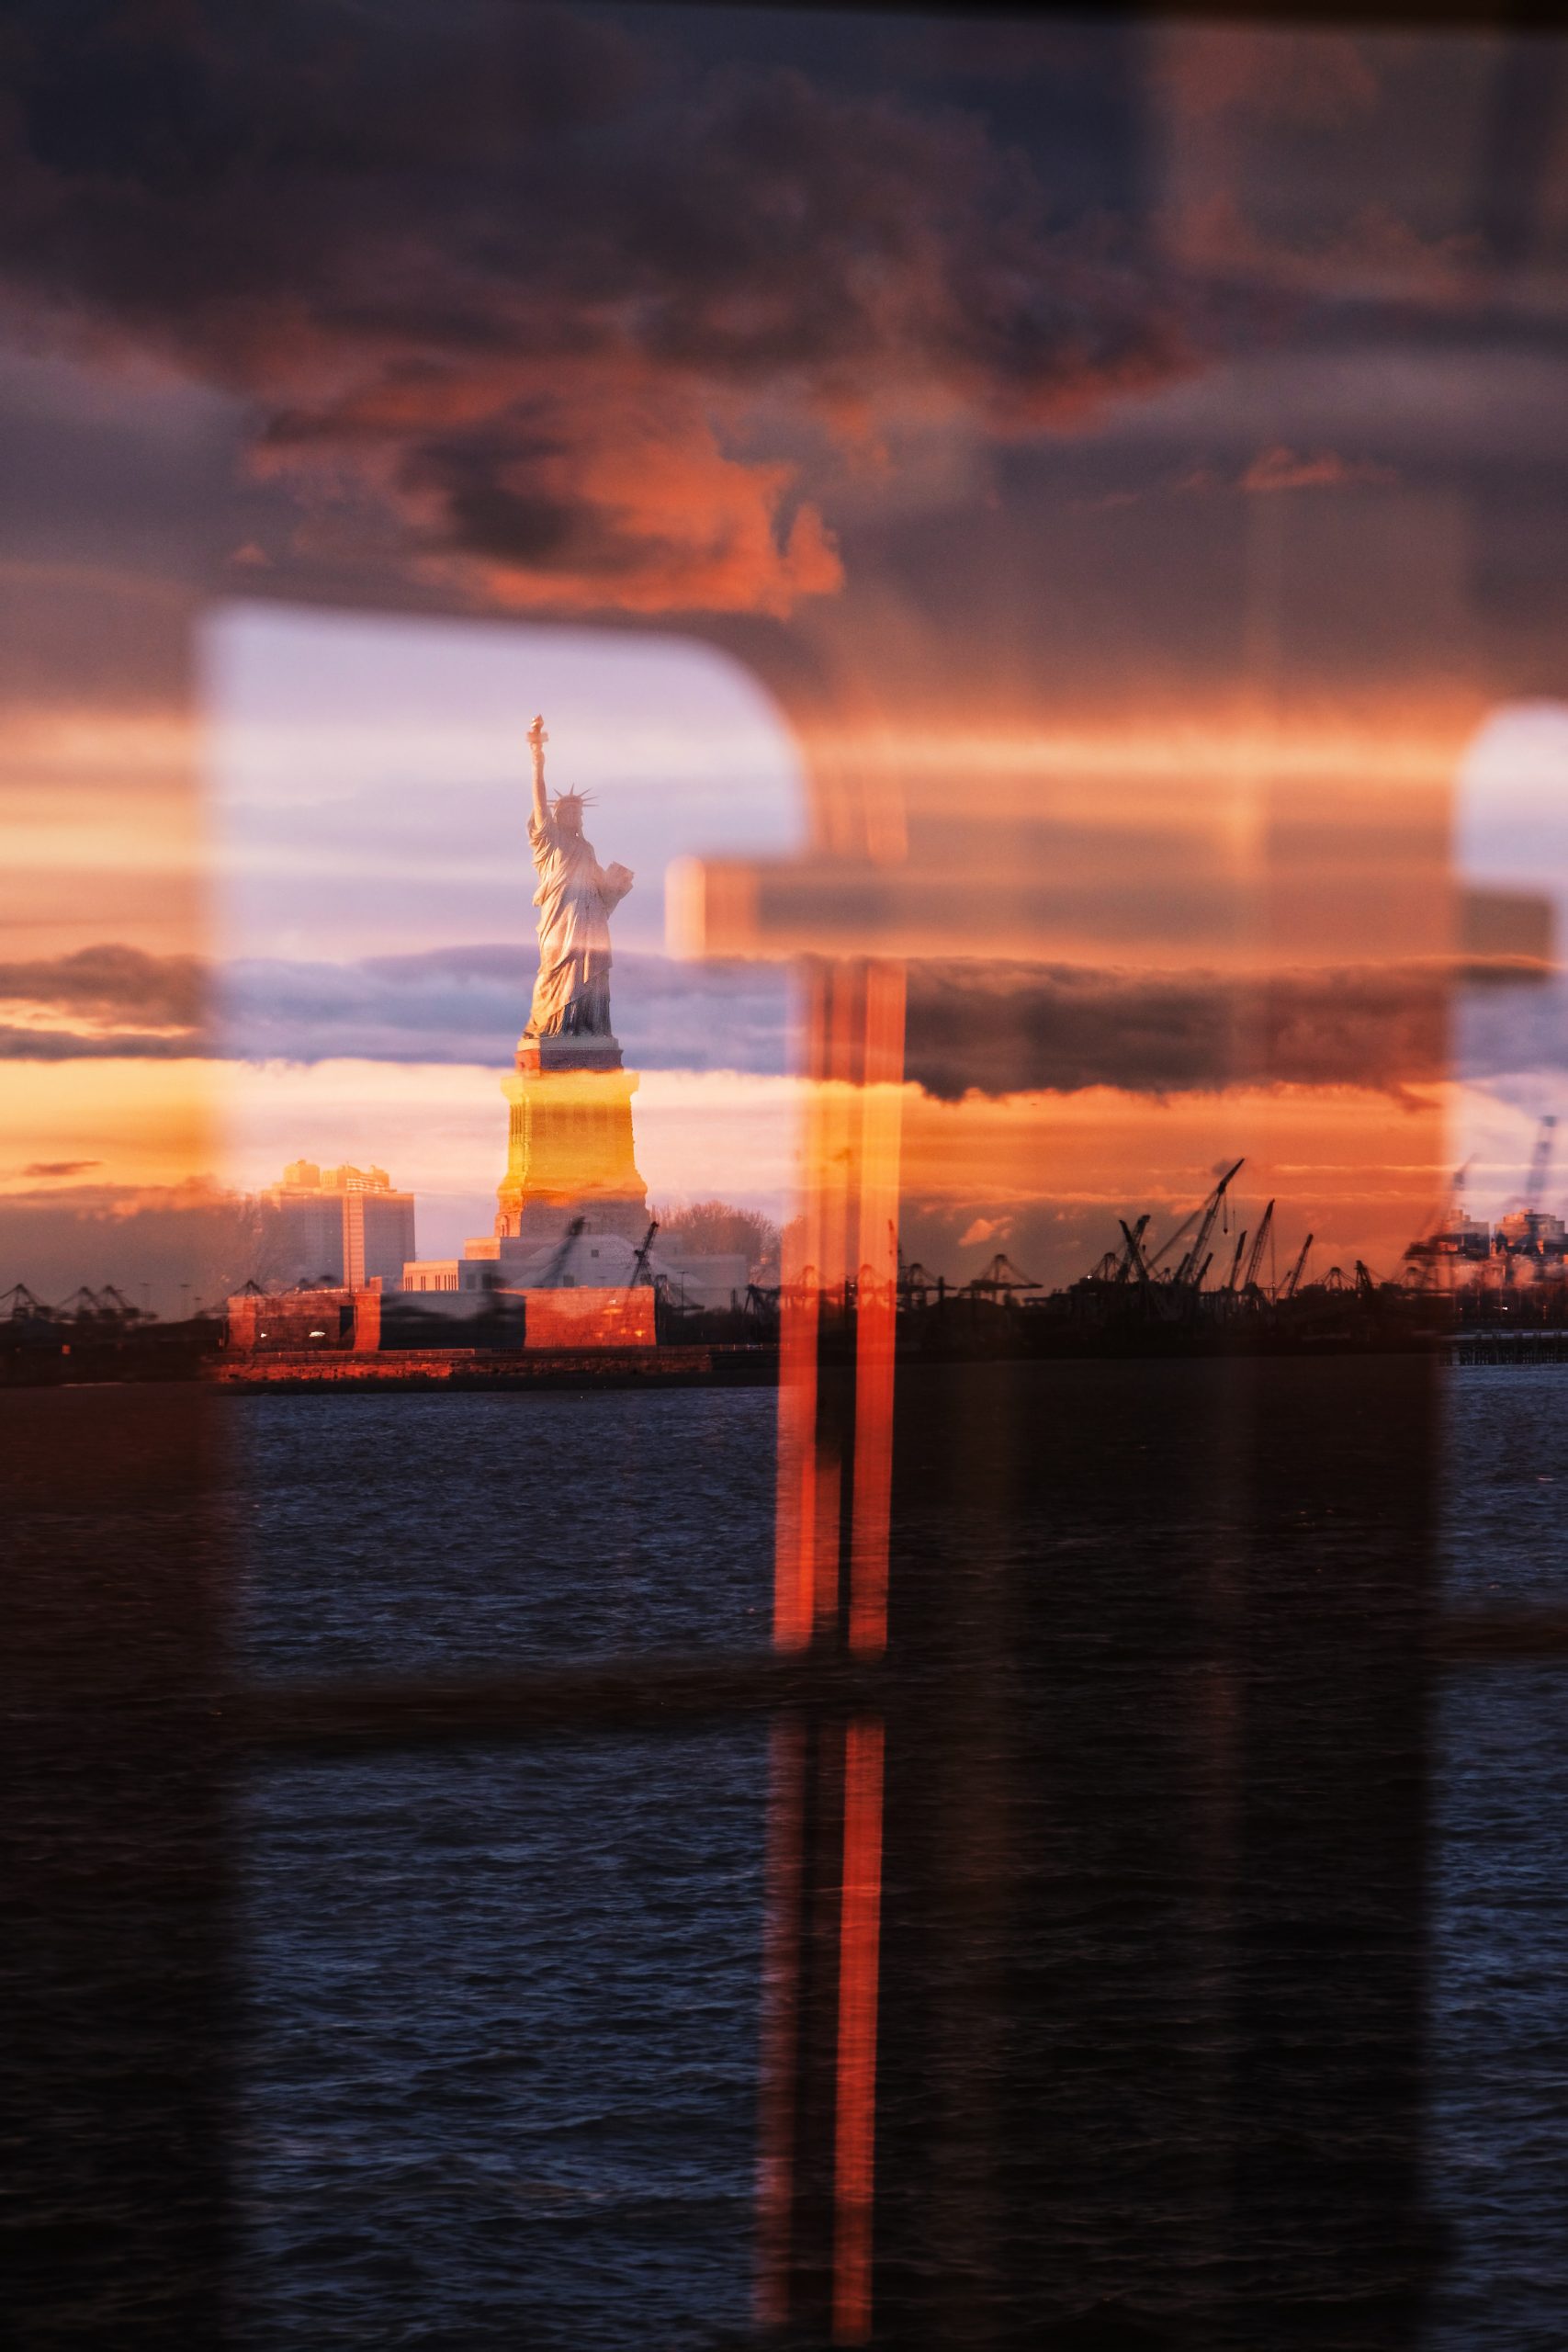 Photograph of New York City and Lady Liberty at sunset by Mike DePetris